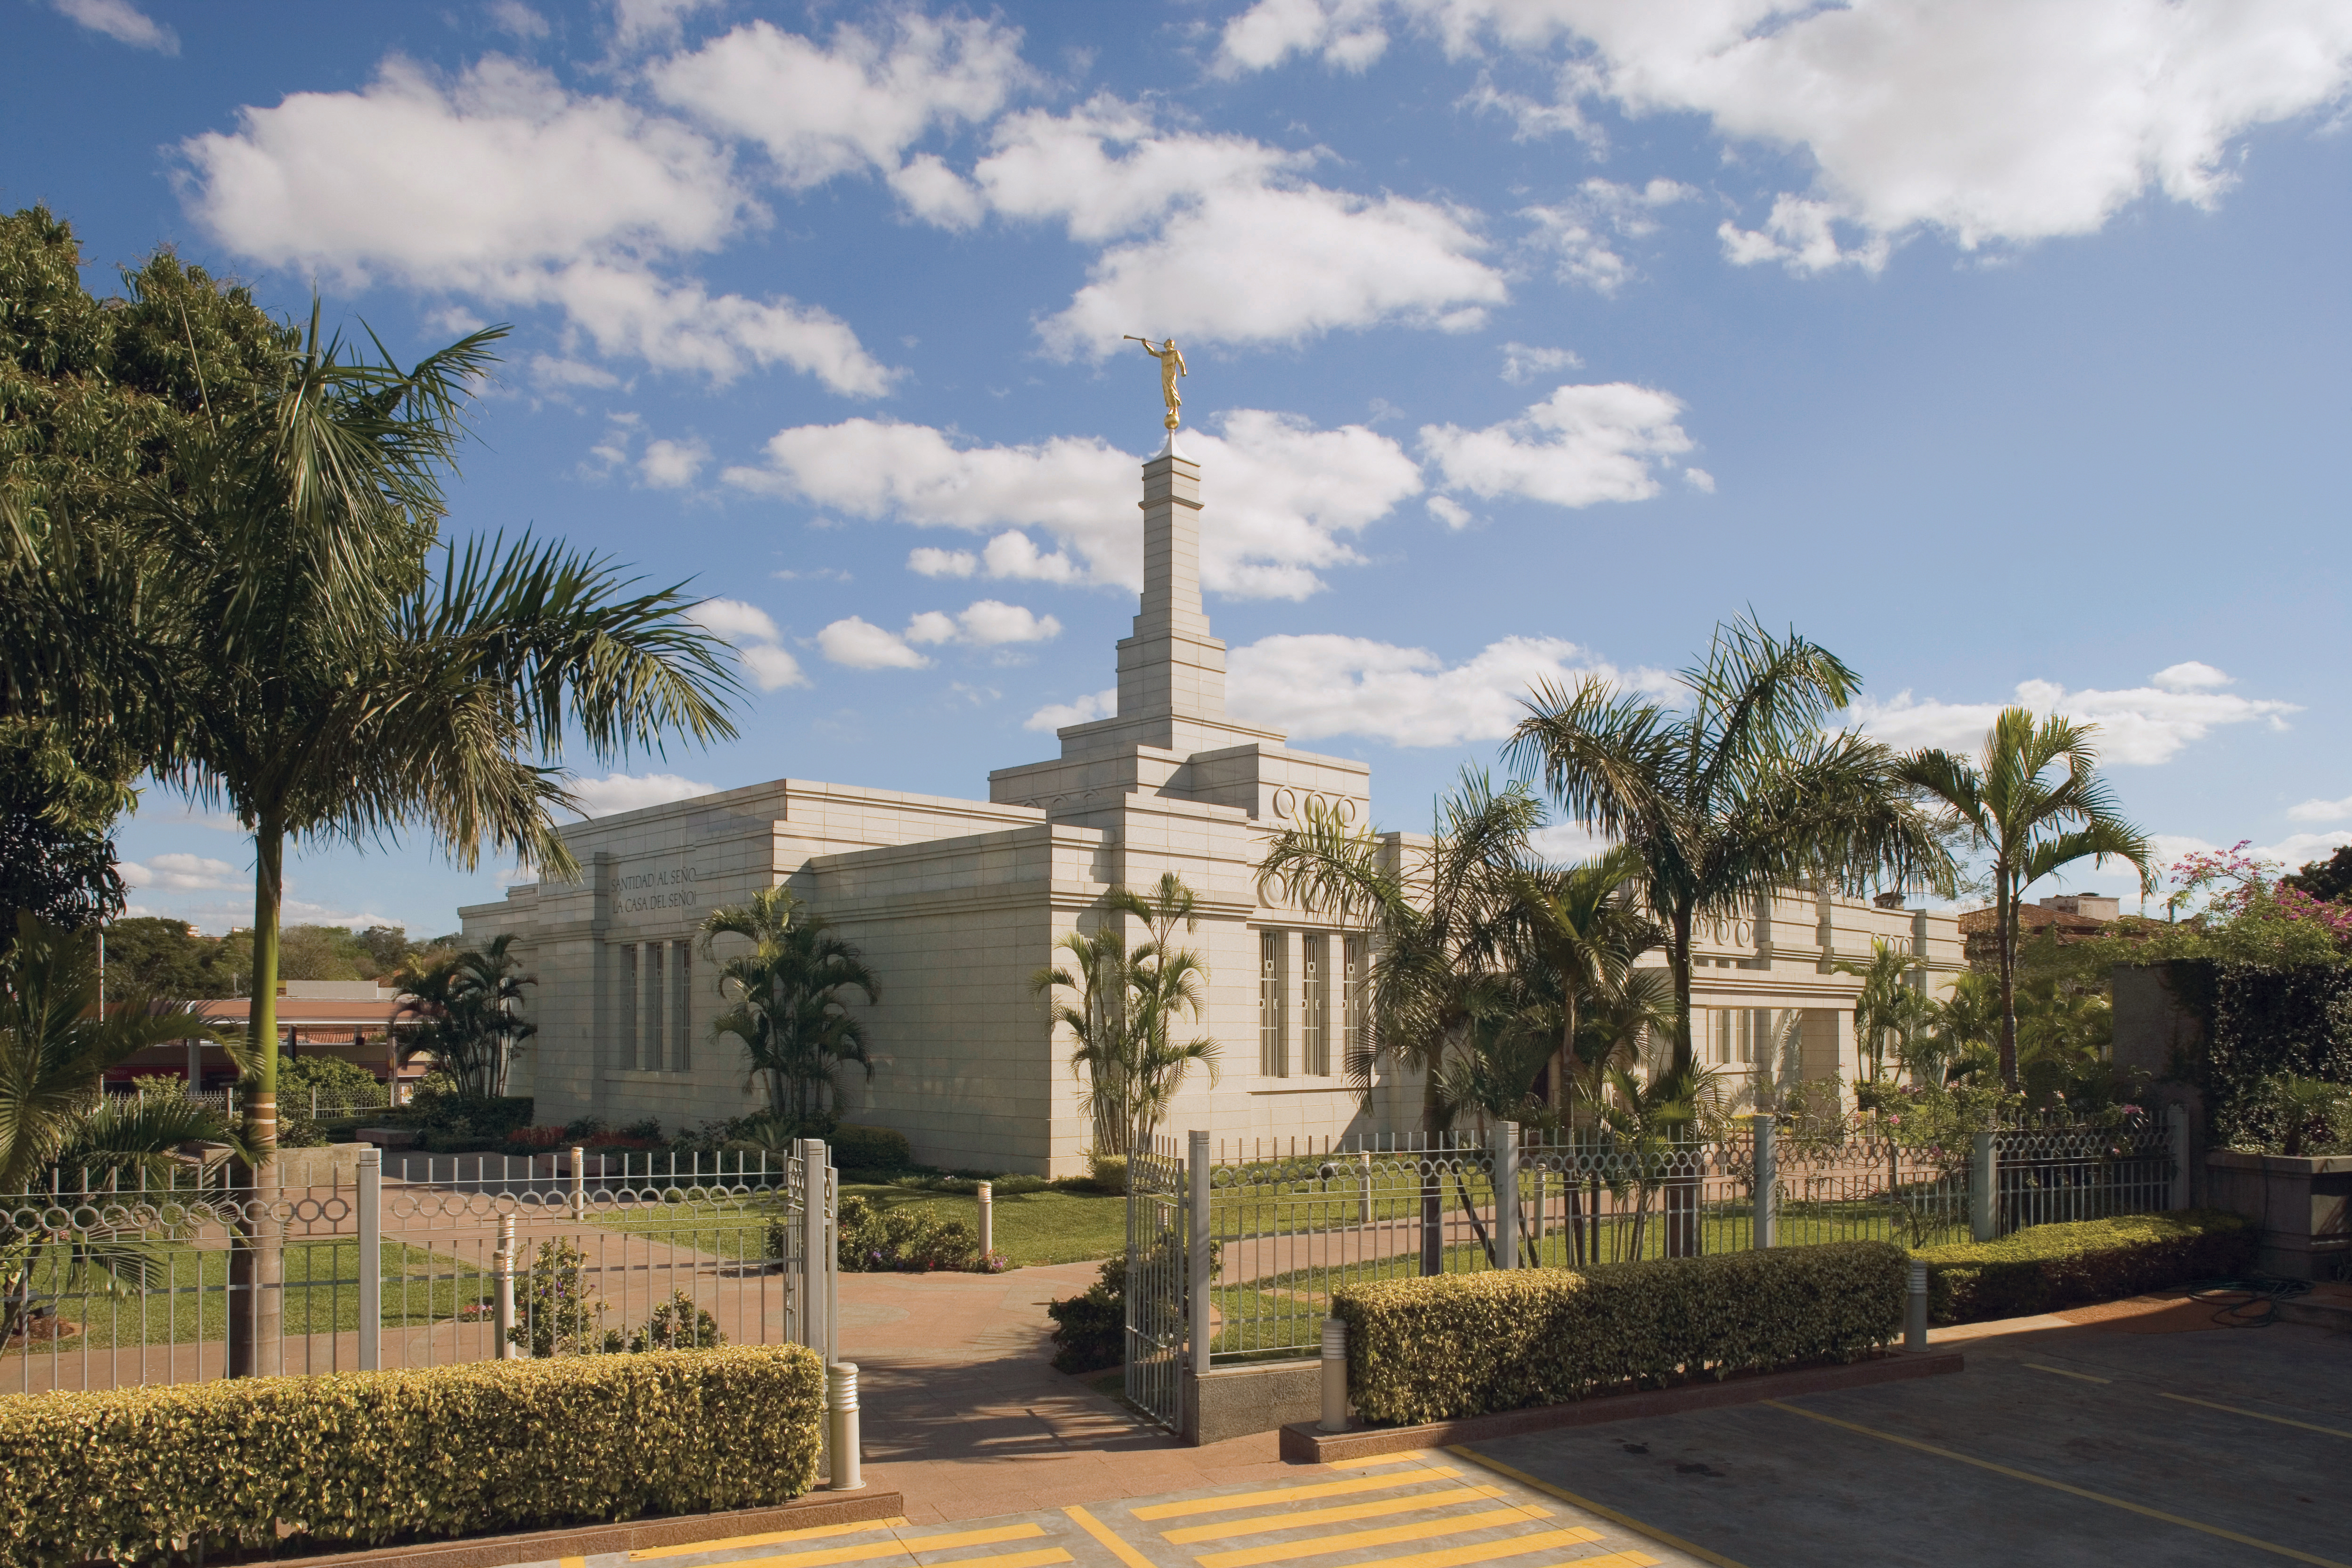 A view of the Asunción Paraguay Temple during the daytime, with the gate open to the grounds.